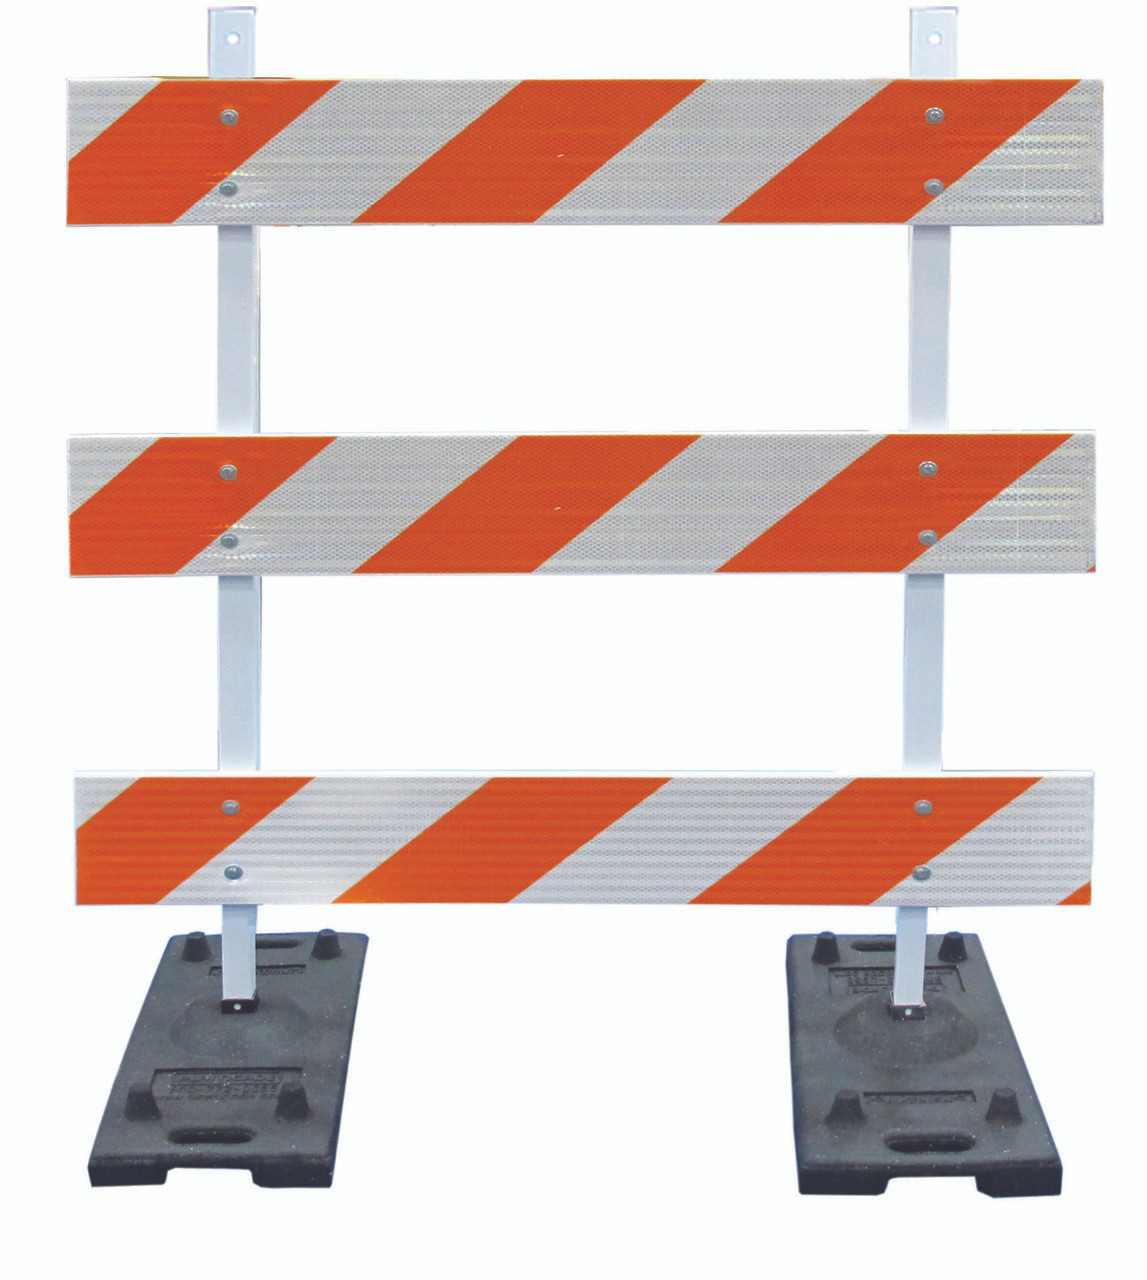 POWER POST&trade; TYPE III BARRICADE KITS - 4' Boards with DG Sheeting BOTH SIDES OF BOARDS